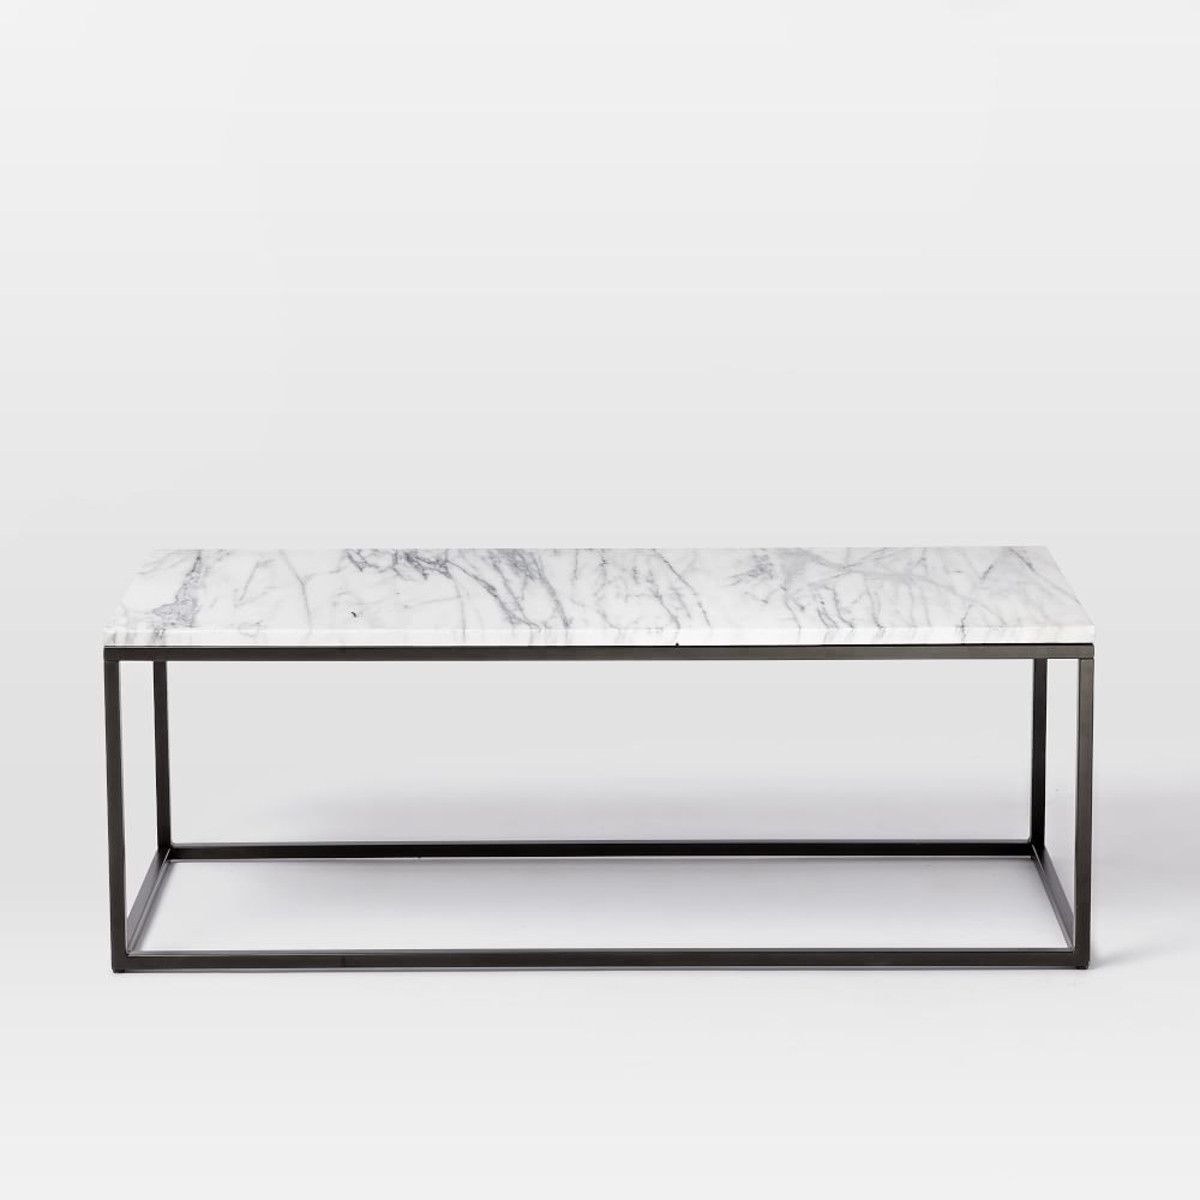 Marble Coffee Table West Elm – Marble Coffee Table: Elegant Table To With Regard To Slab Large Marble Coffee Tables With Brass Base (View 5 of 30)